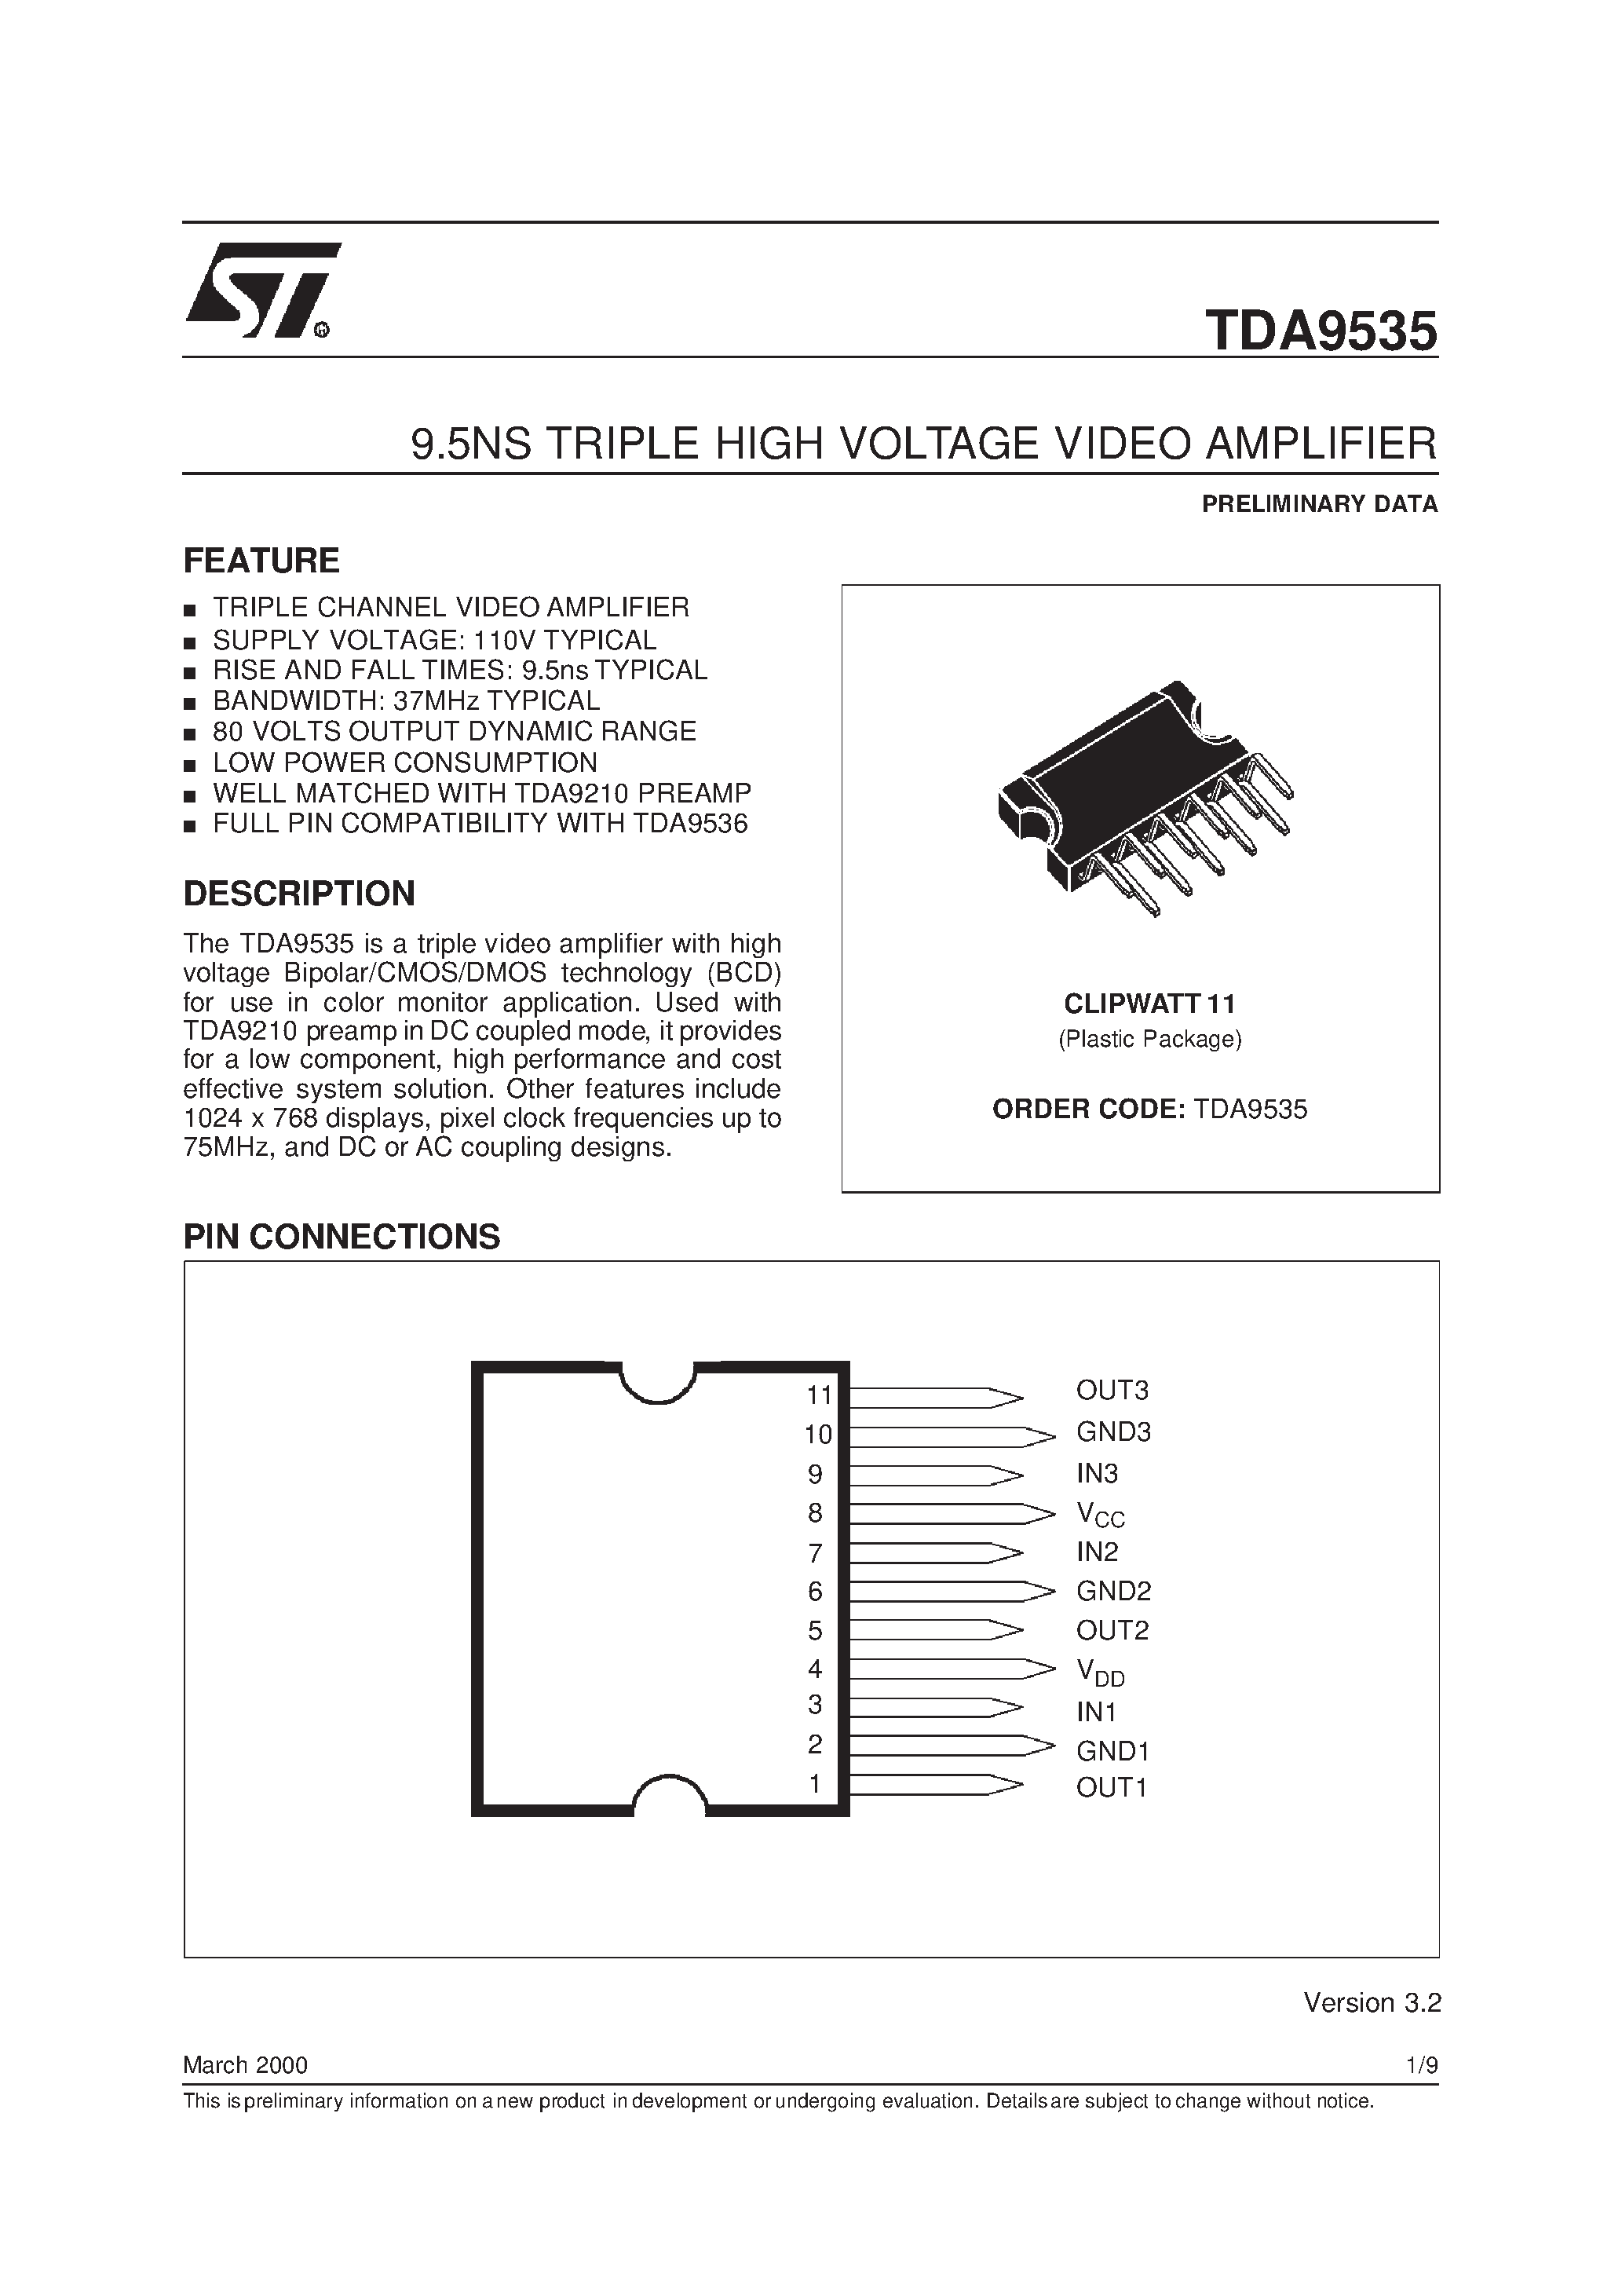 Datasheet TDA9535 - 9.5NS TRIPLE HIGH VOLTAGE VIDEO AMPLIFIER page 1